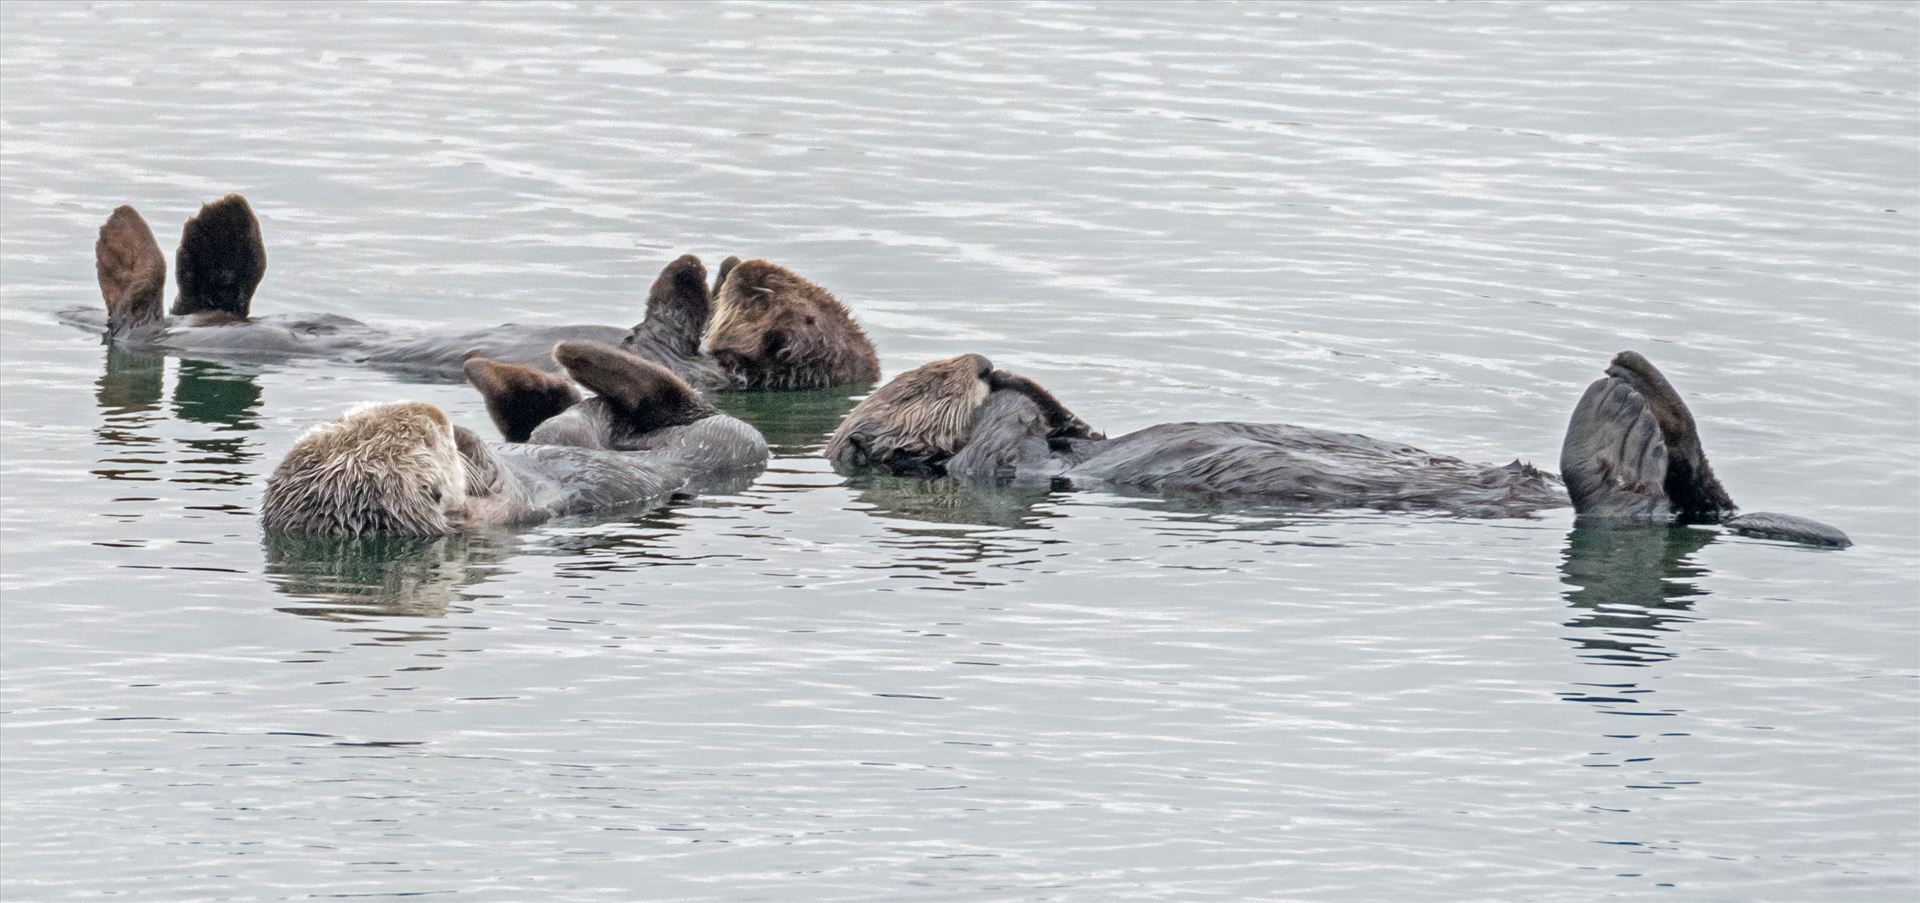 Sea Otter Prayer Group - sea otters resting in a group by Denise Buckley Crawford